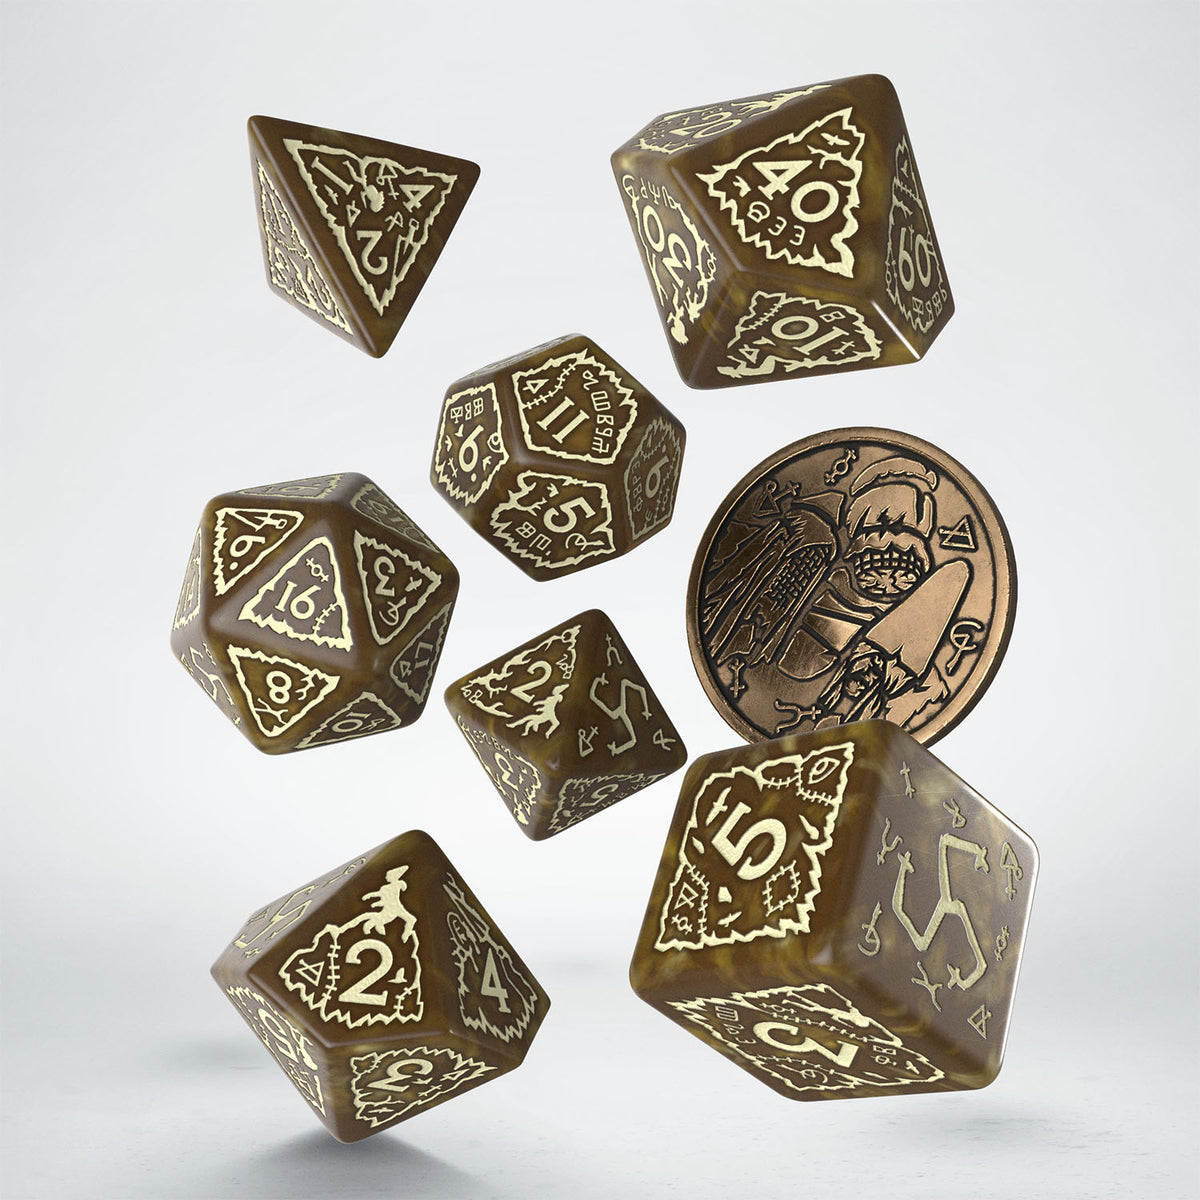 Q Workshop - The Witcher Dice Set Crones - Weavess Dice Set 7 With Coin